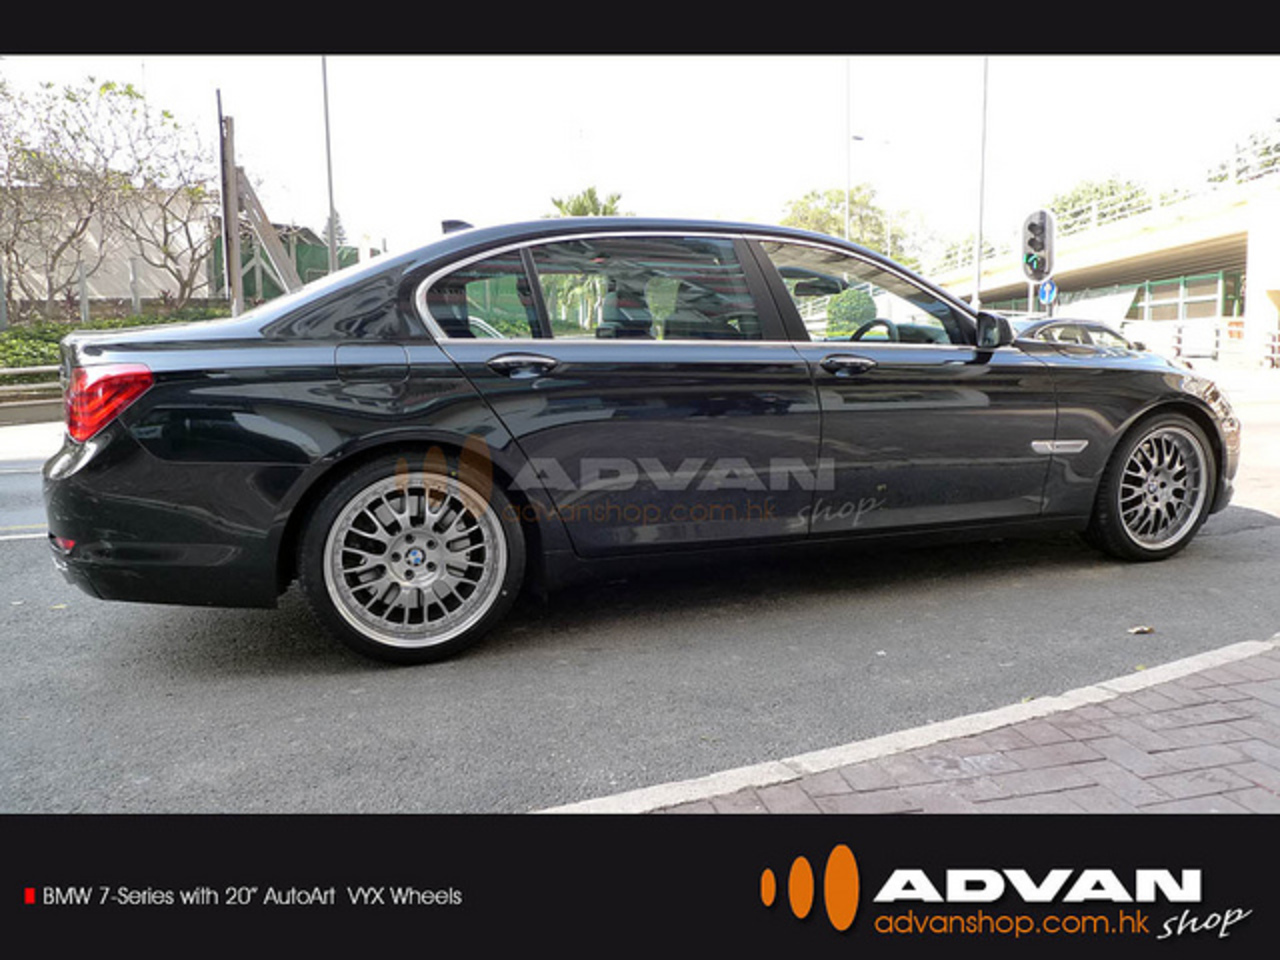 BMW 7-Series with 20" AutoArt VYX Wheels | Flickr - Photo Sharing!